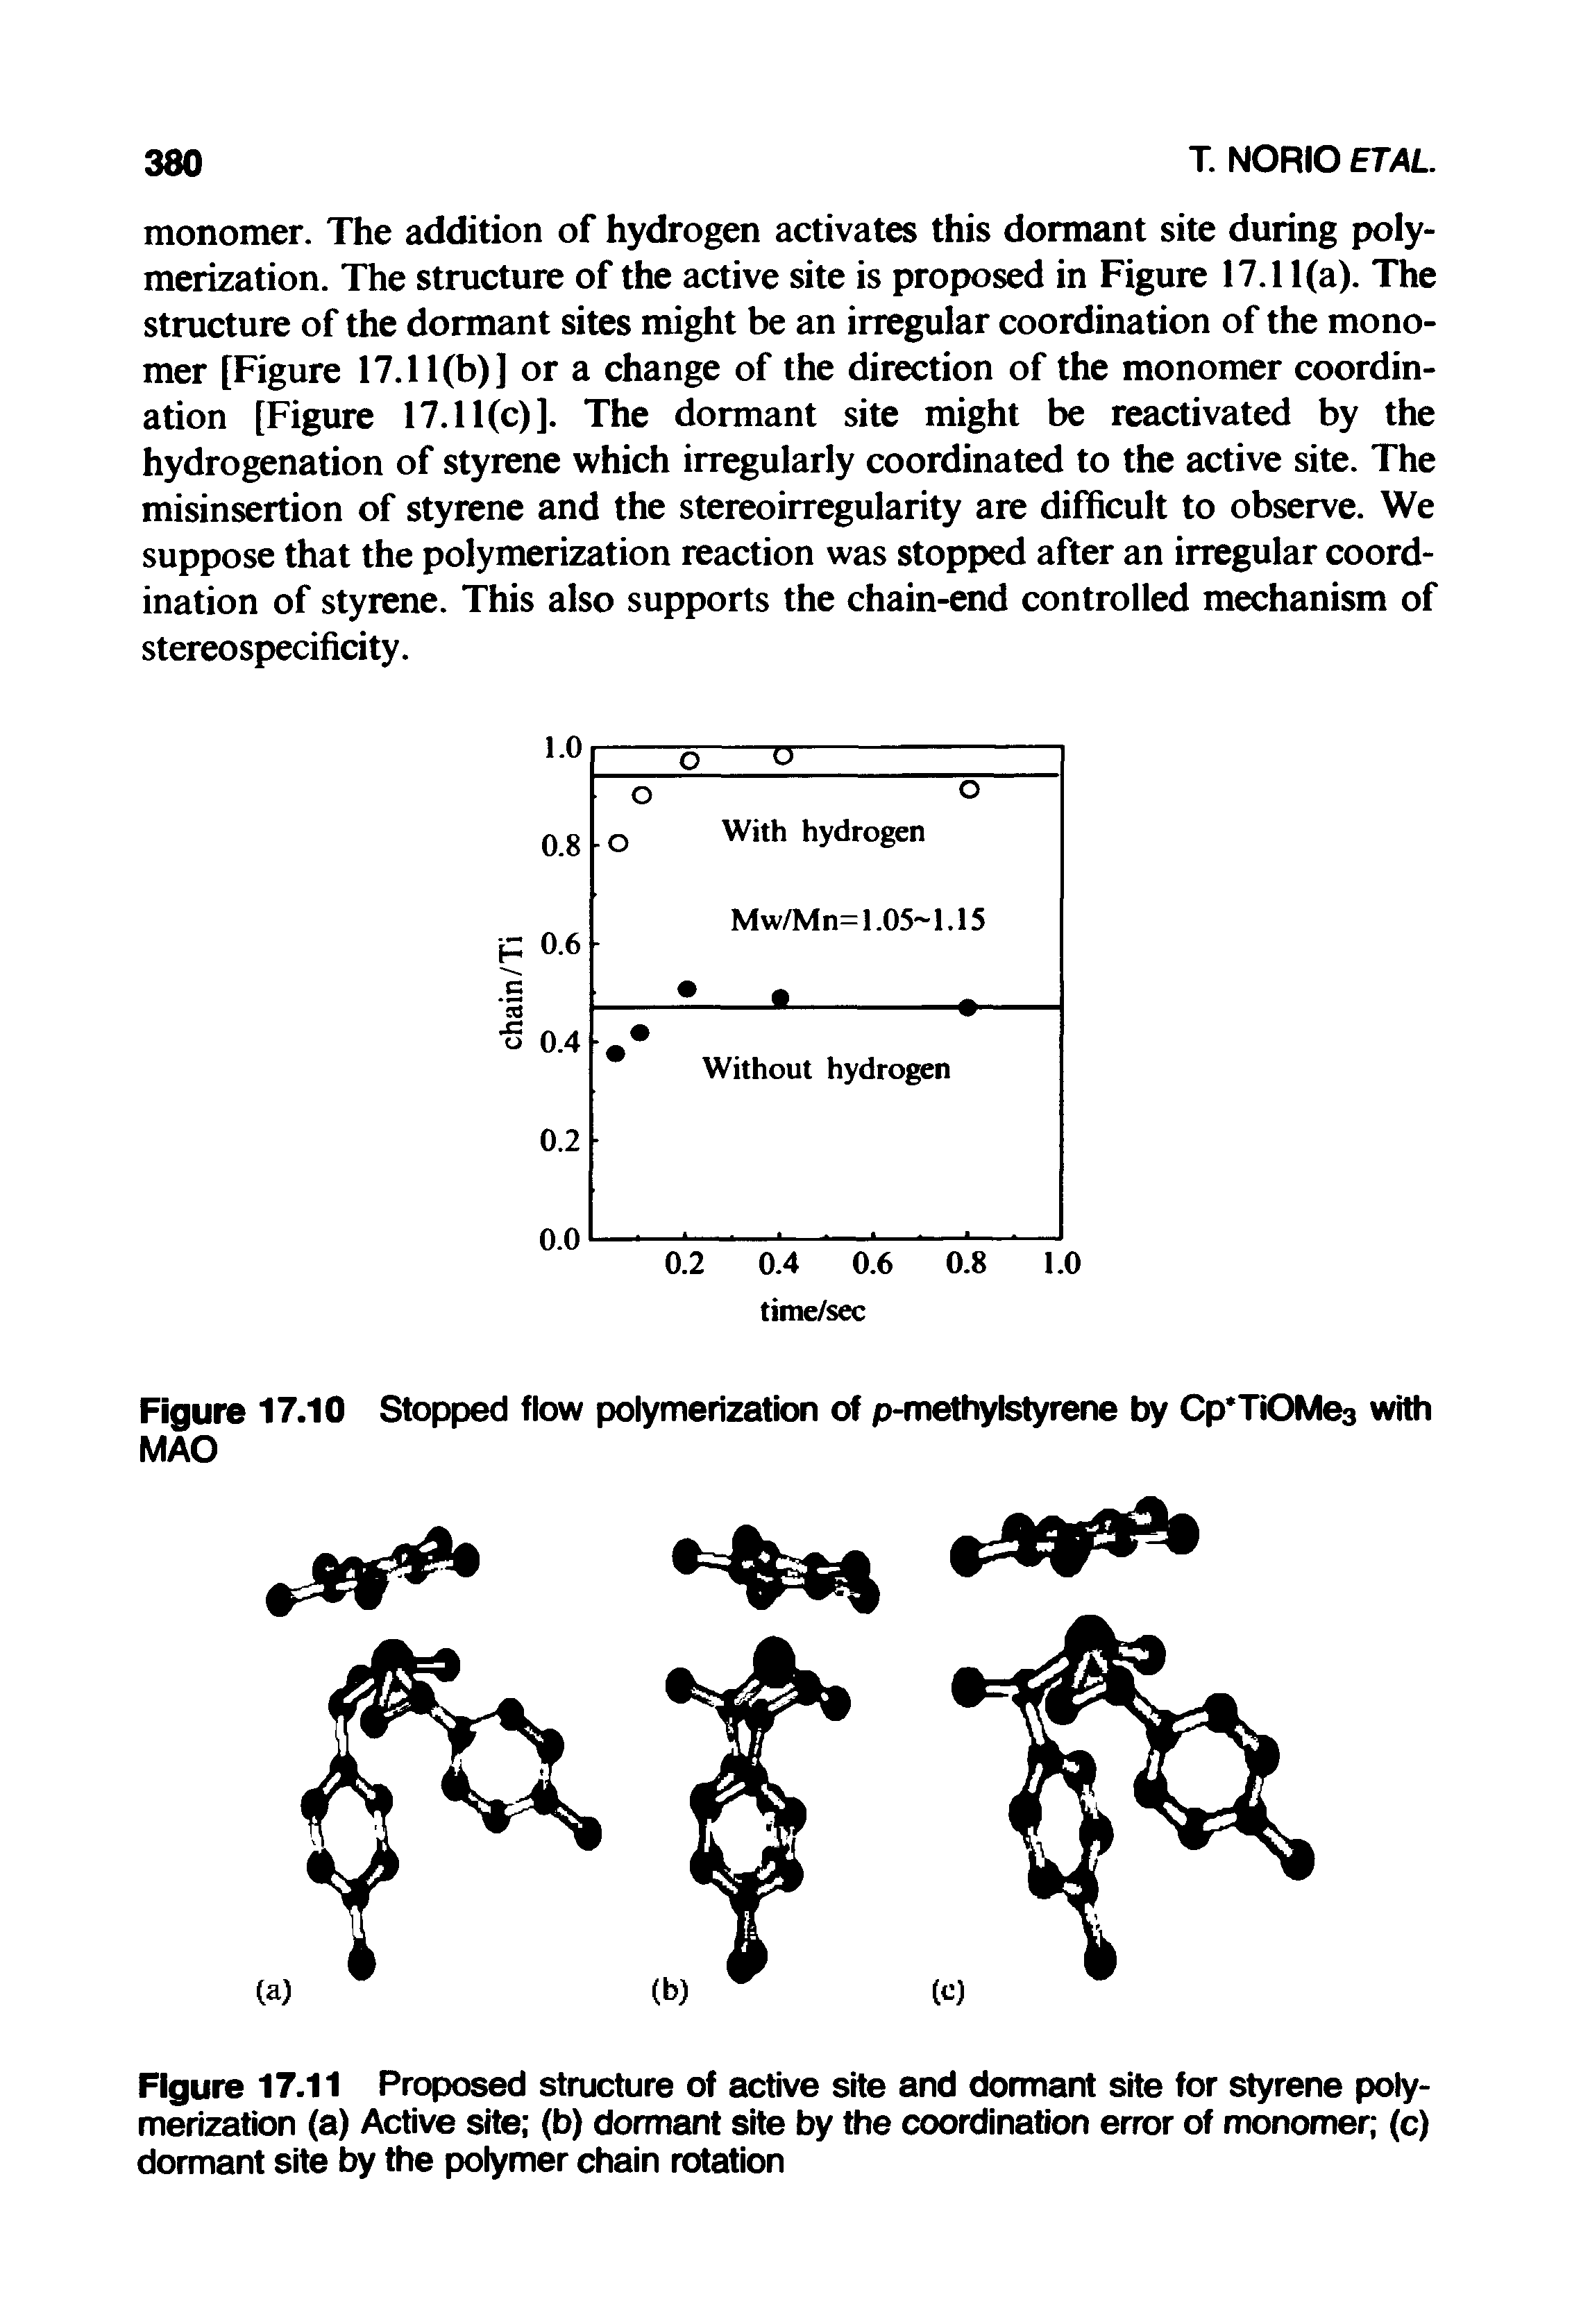 Figure 17.11 Proposed structure of active site and dormant site for styrene polymerization (a) Active site (b) dormant site by the coordination error of monomer (c) dormant site by the polymer chain rotation...